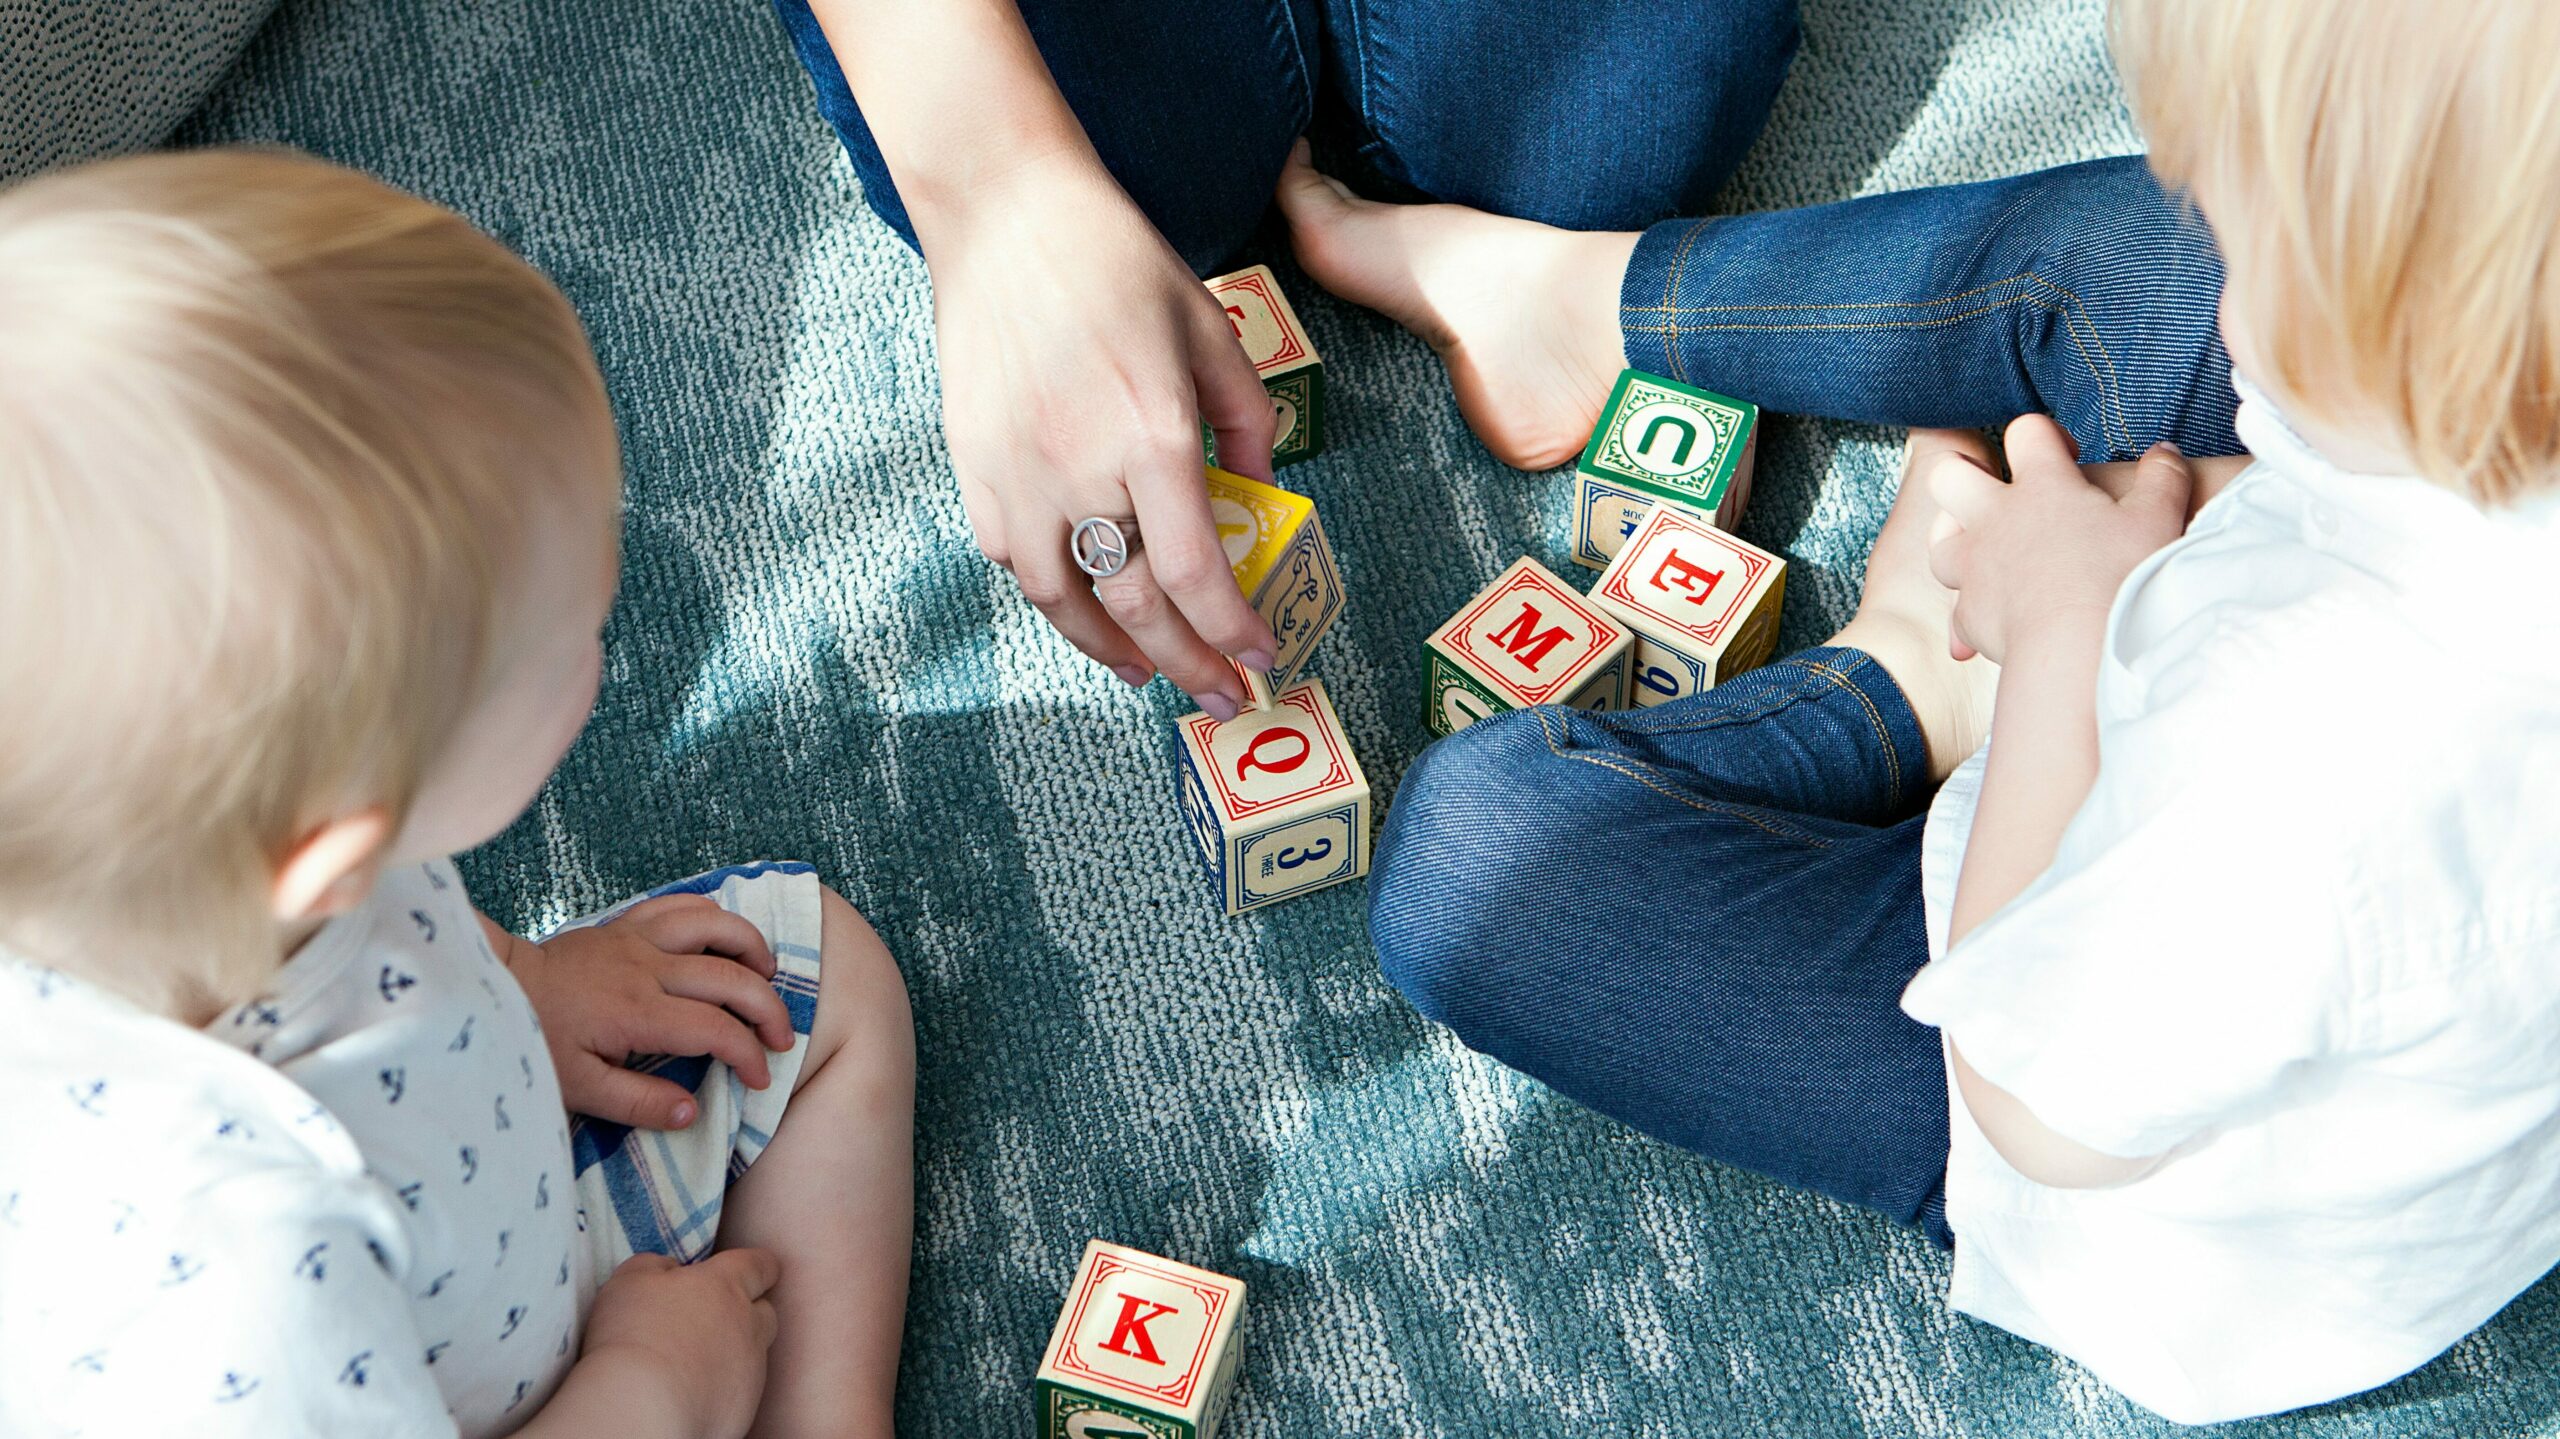 Two children engage with educational wooden blocks under the guidance of an adult, illustrating a screen-free learning environment. This scene contrasts with the effects of kids' screen time, emphasizing the importance of hands-on educational activities and direct interaction in early childhood development.